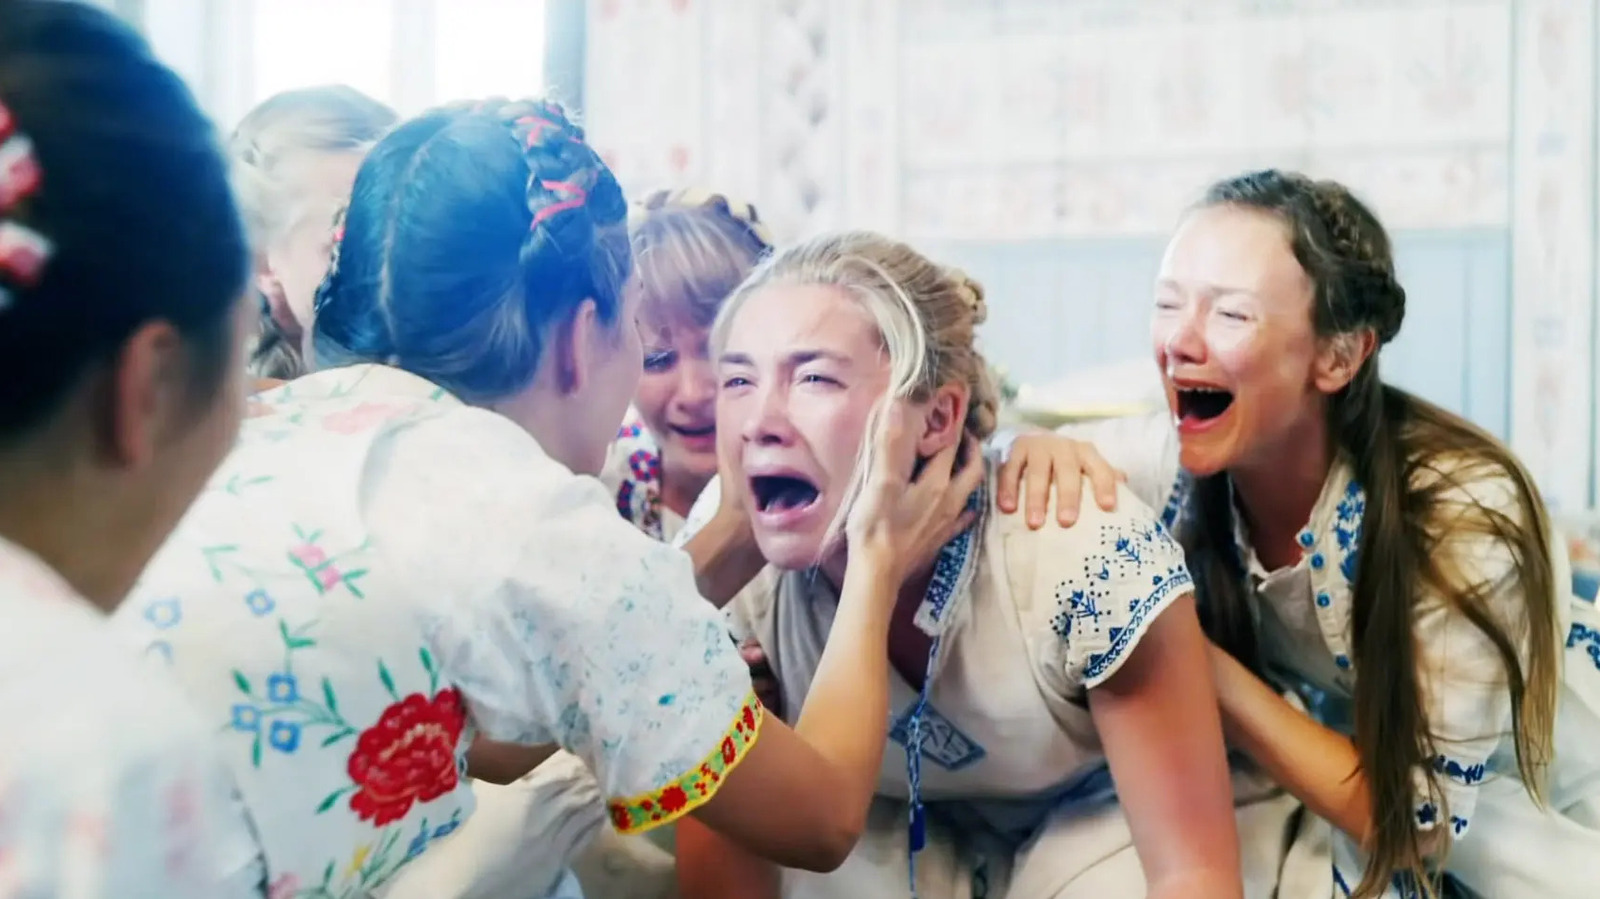 How Midsommar Made Horror Out of a Less Scary Festival